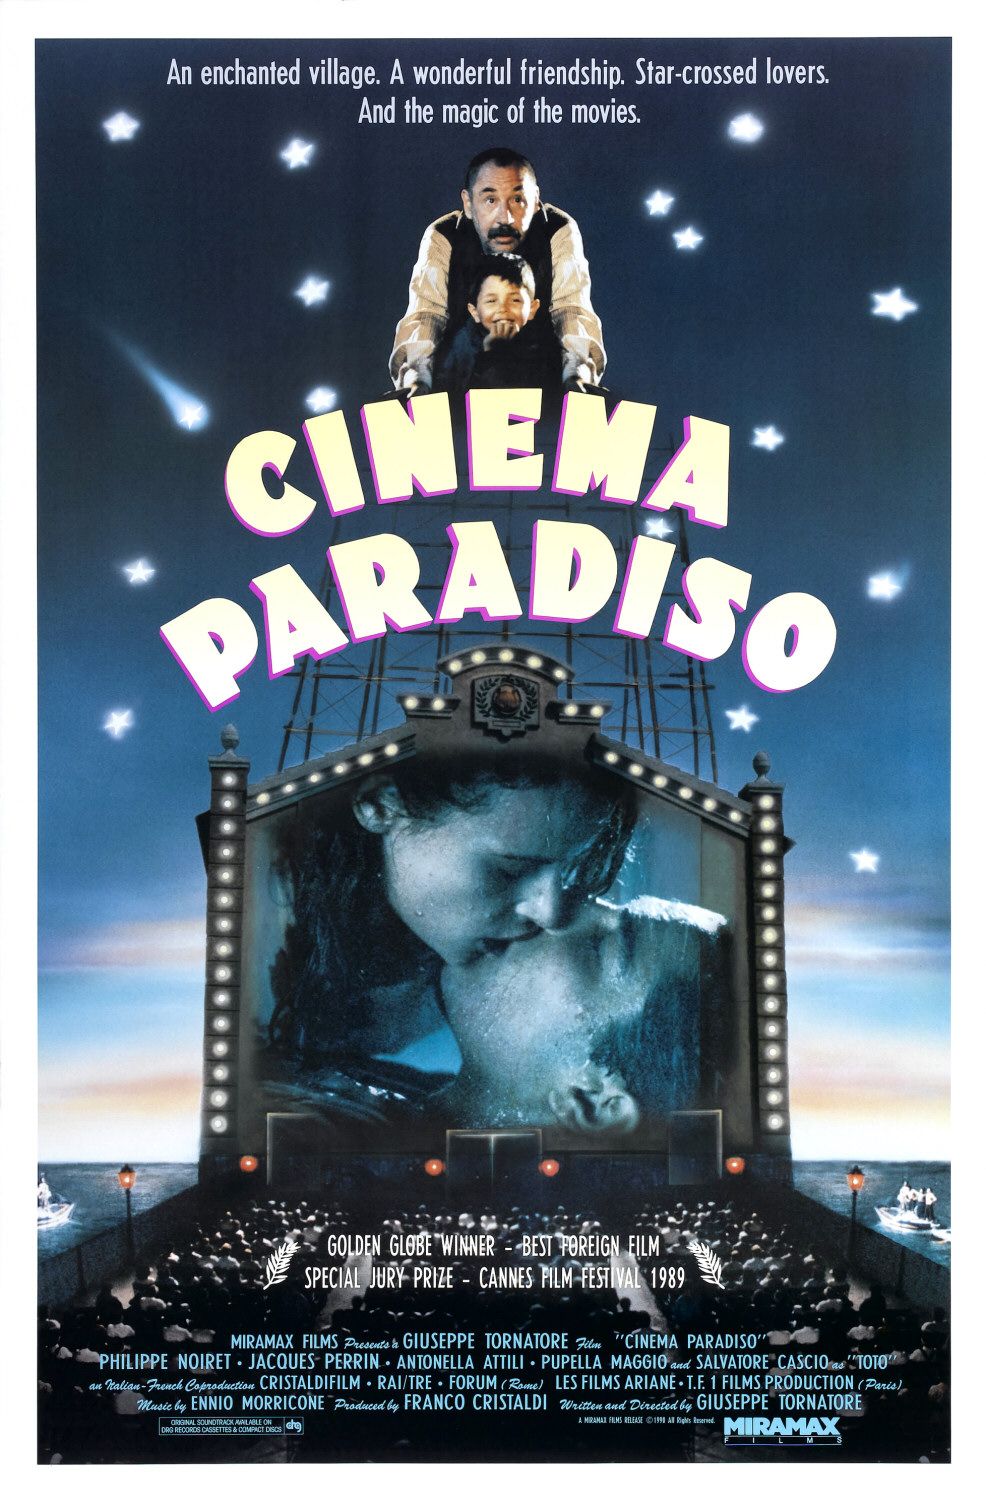 Extra Large Movie Poster Image for Cinema Paradiso